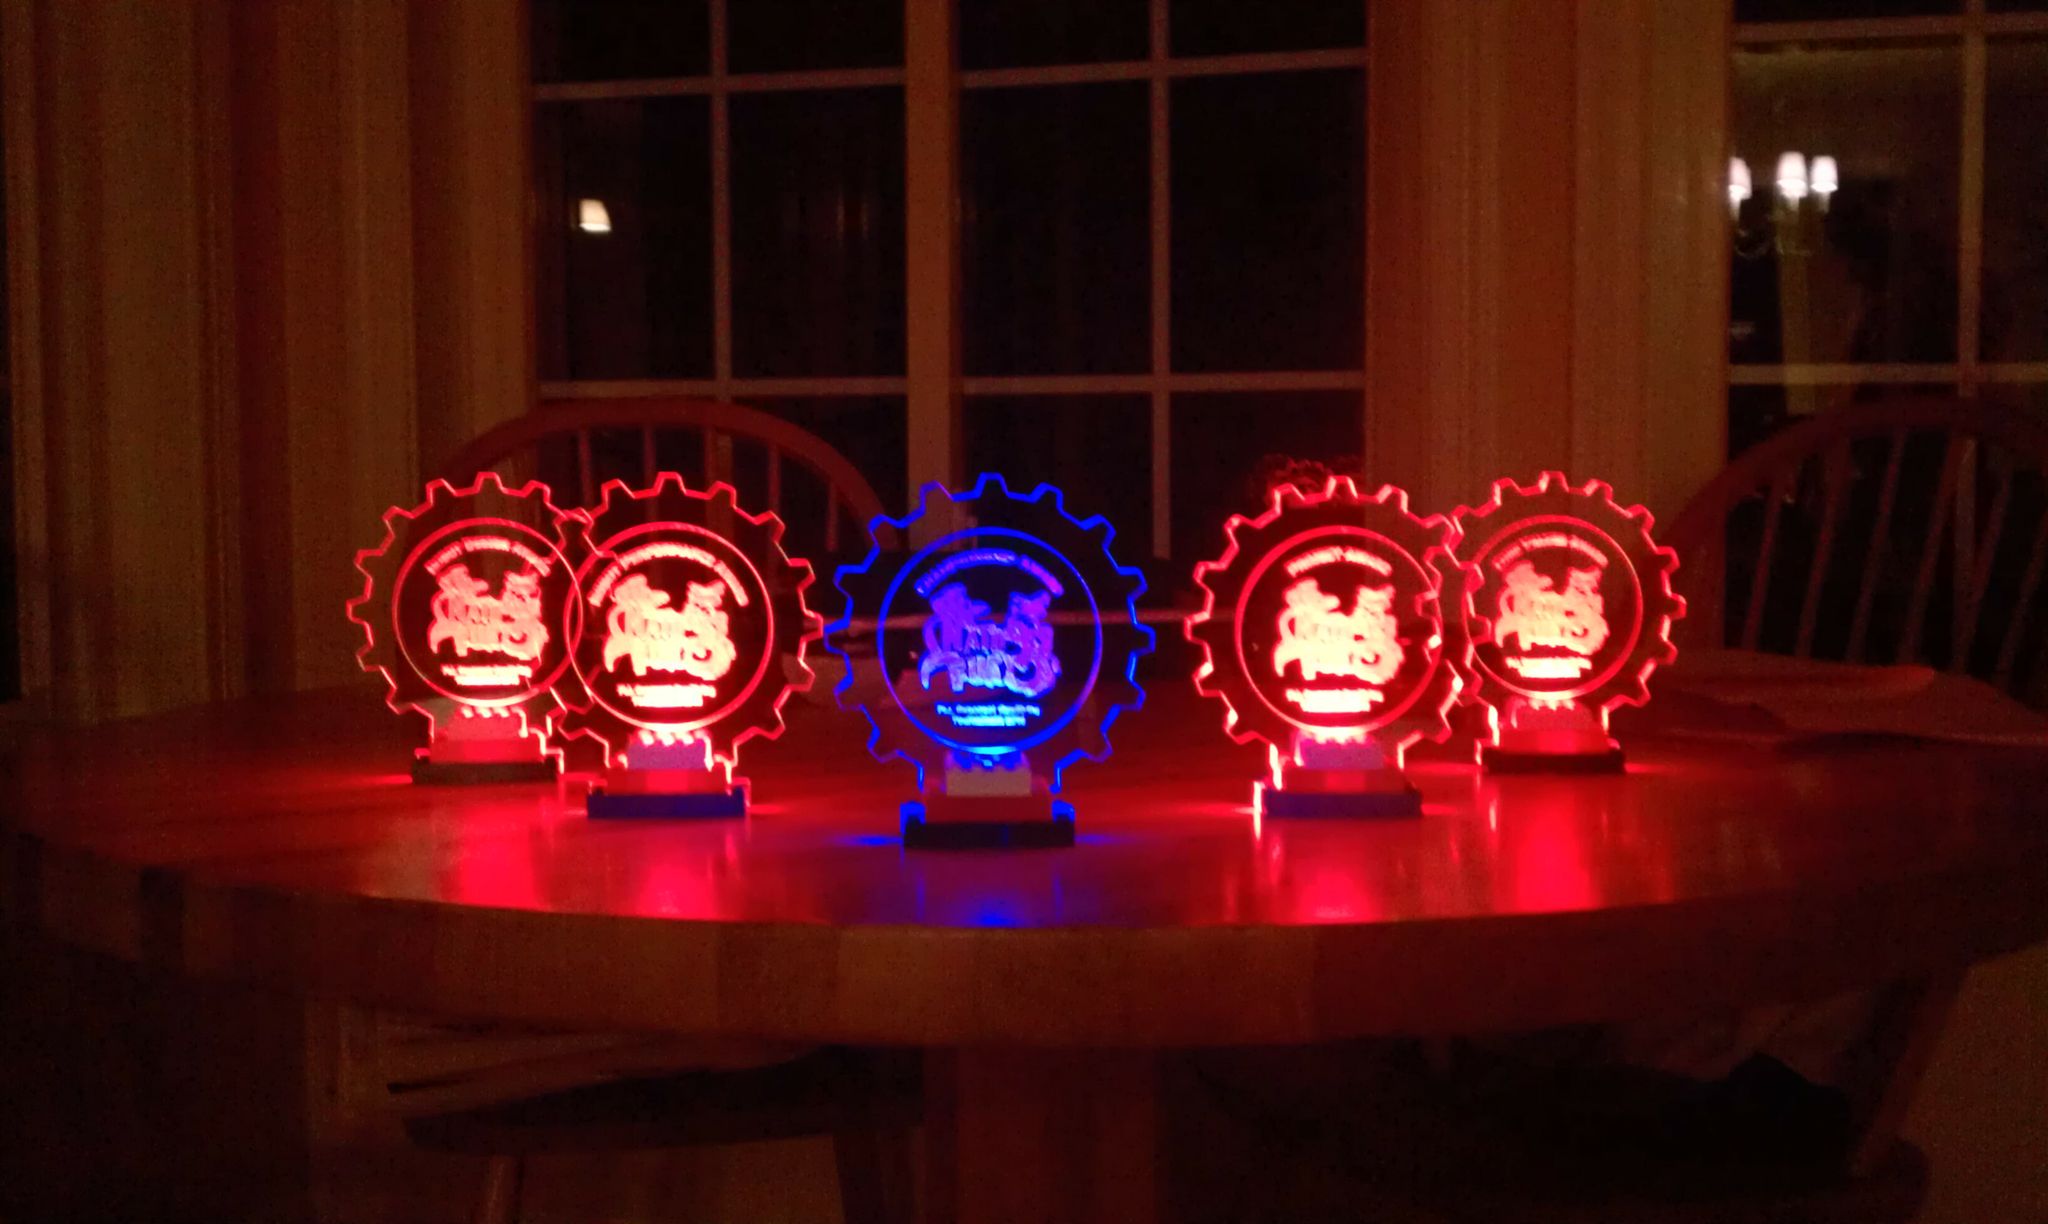 Team 3499 FLL Trophies - Lit up by LEDs